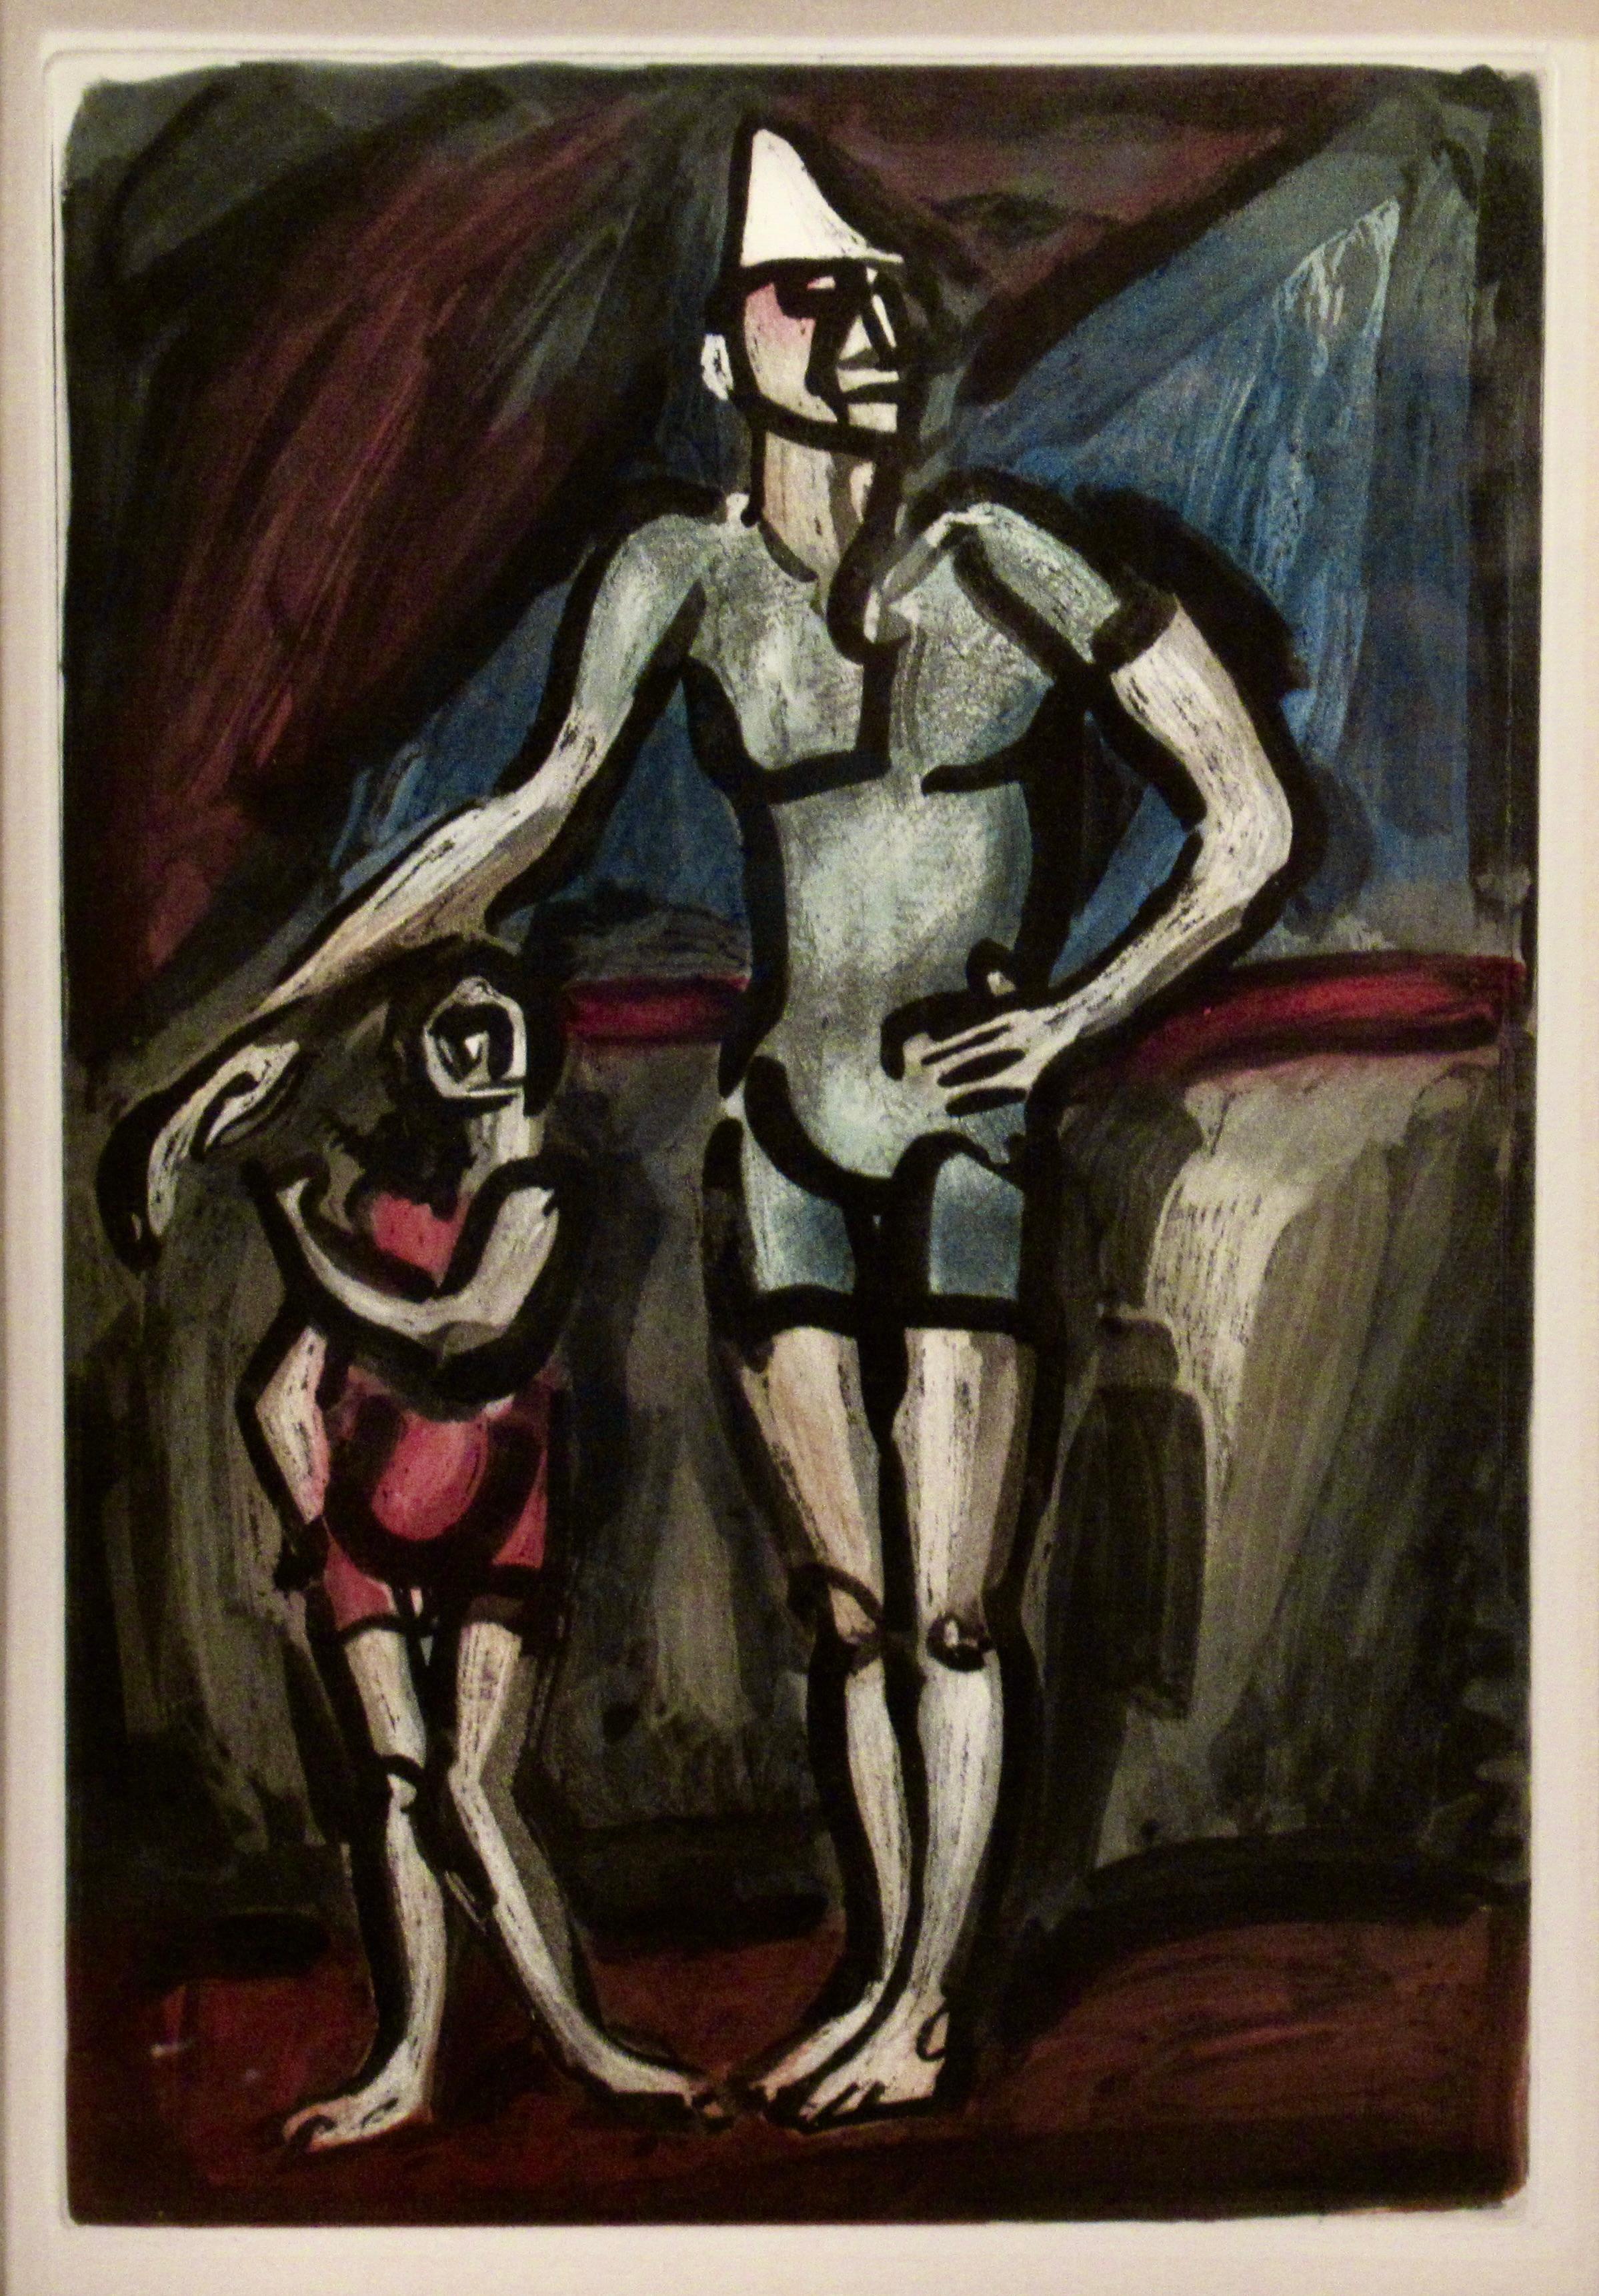 Clown et Enfant (Clown and Child) From the suite Cirque (Circus) - Print by Georges Rouault